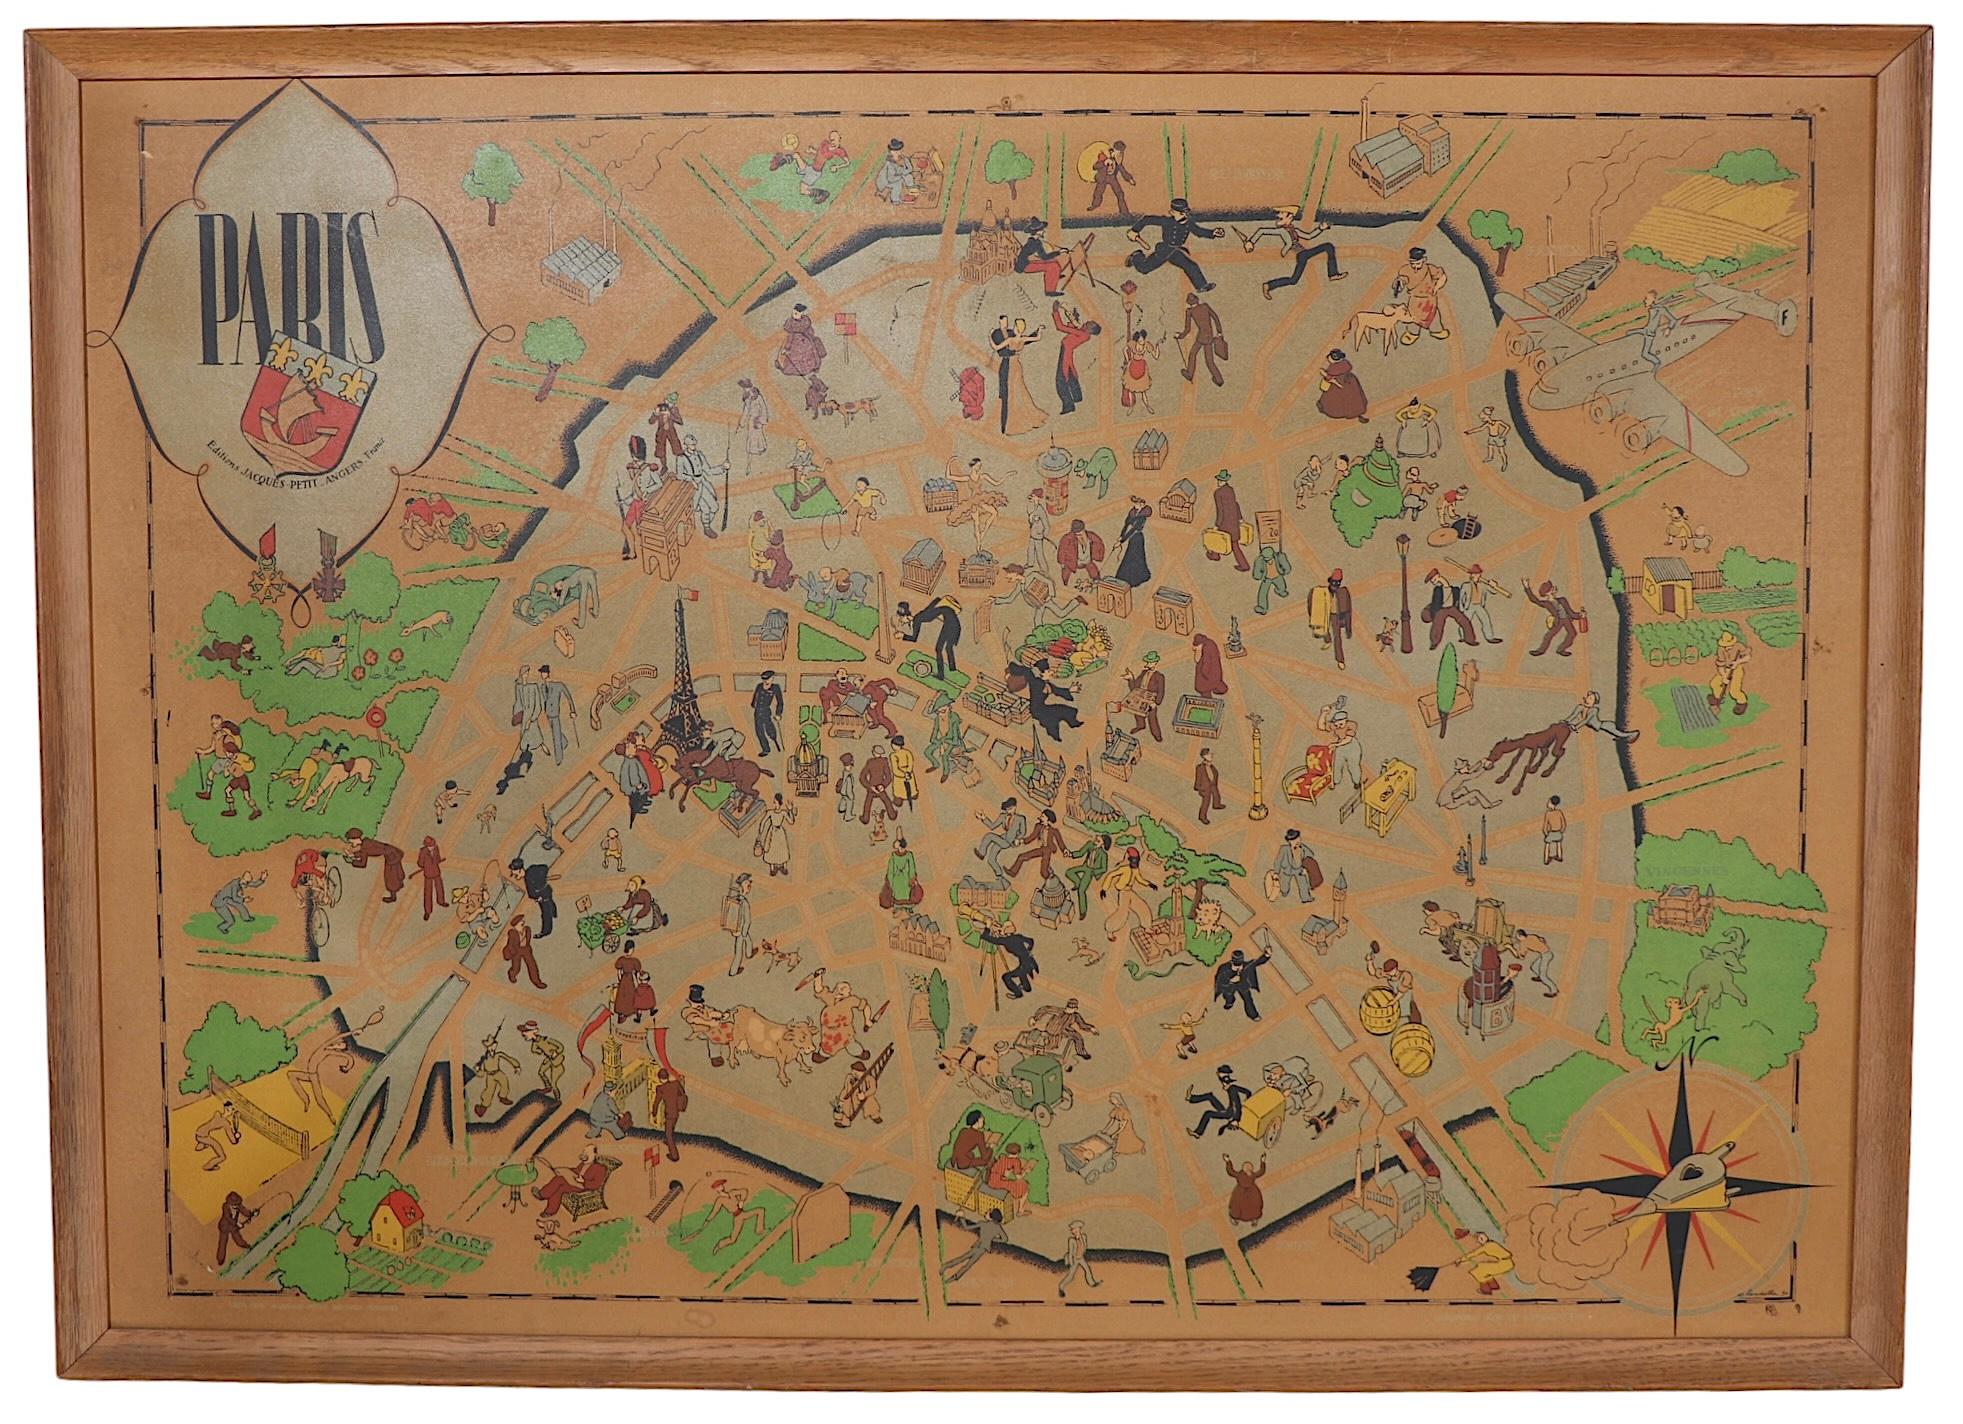 Art Deco cartoon style map of Paris possibly by Arthur Zaidenberg. The map depicts witty references to Parisians lifestyle, along with drawings of notable landmarks,  circa 1930's. This example is in very good, original vintage condition, showing